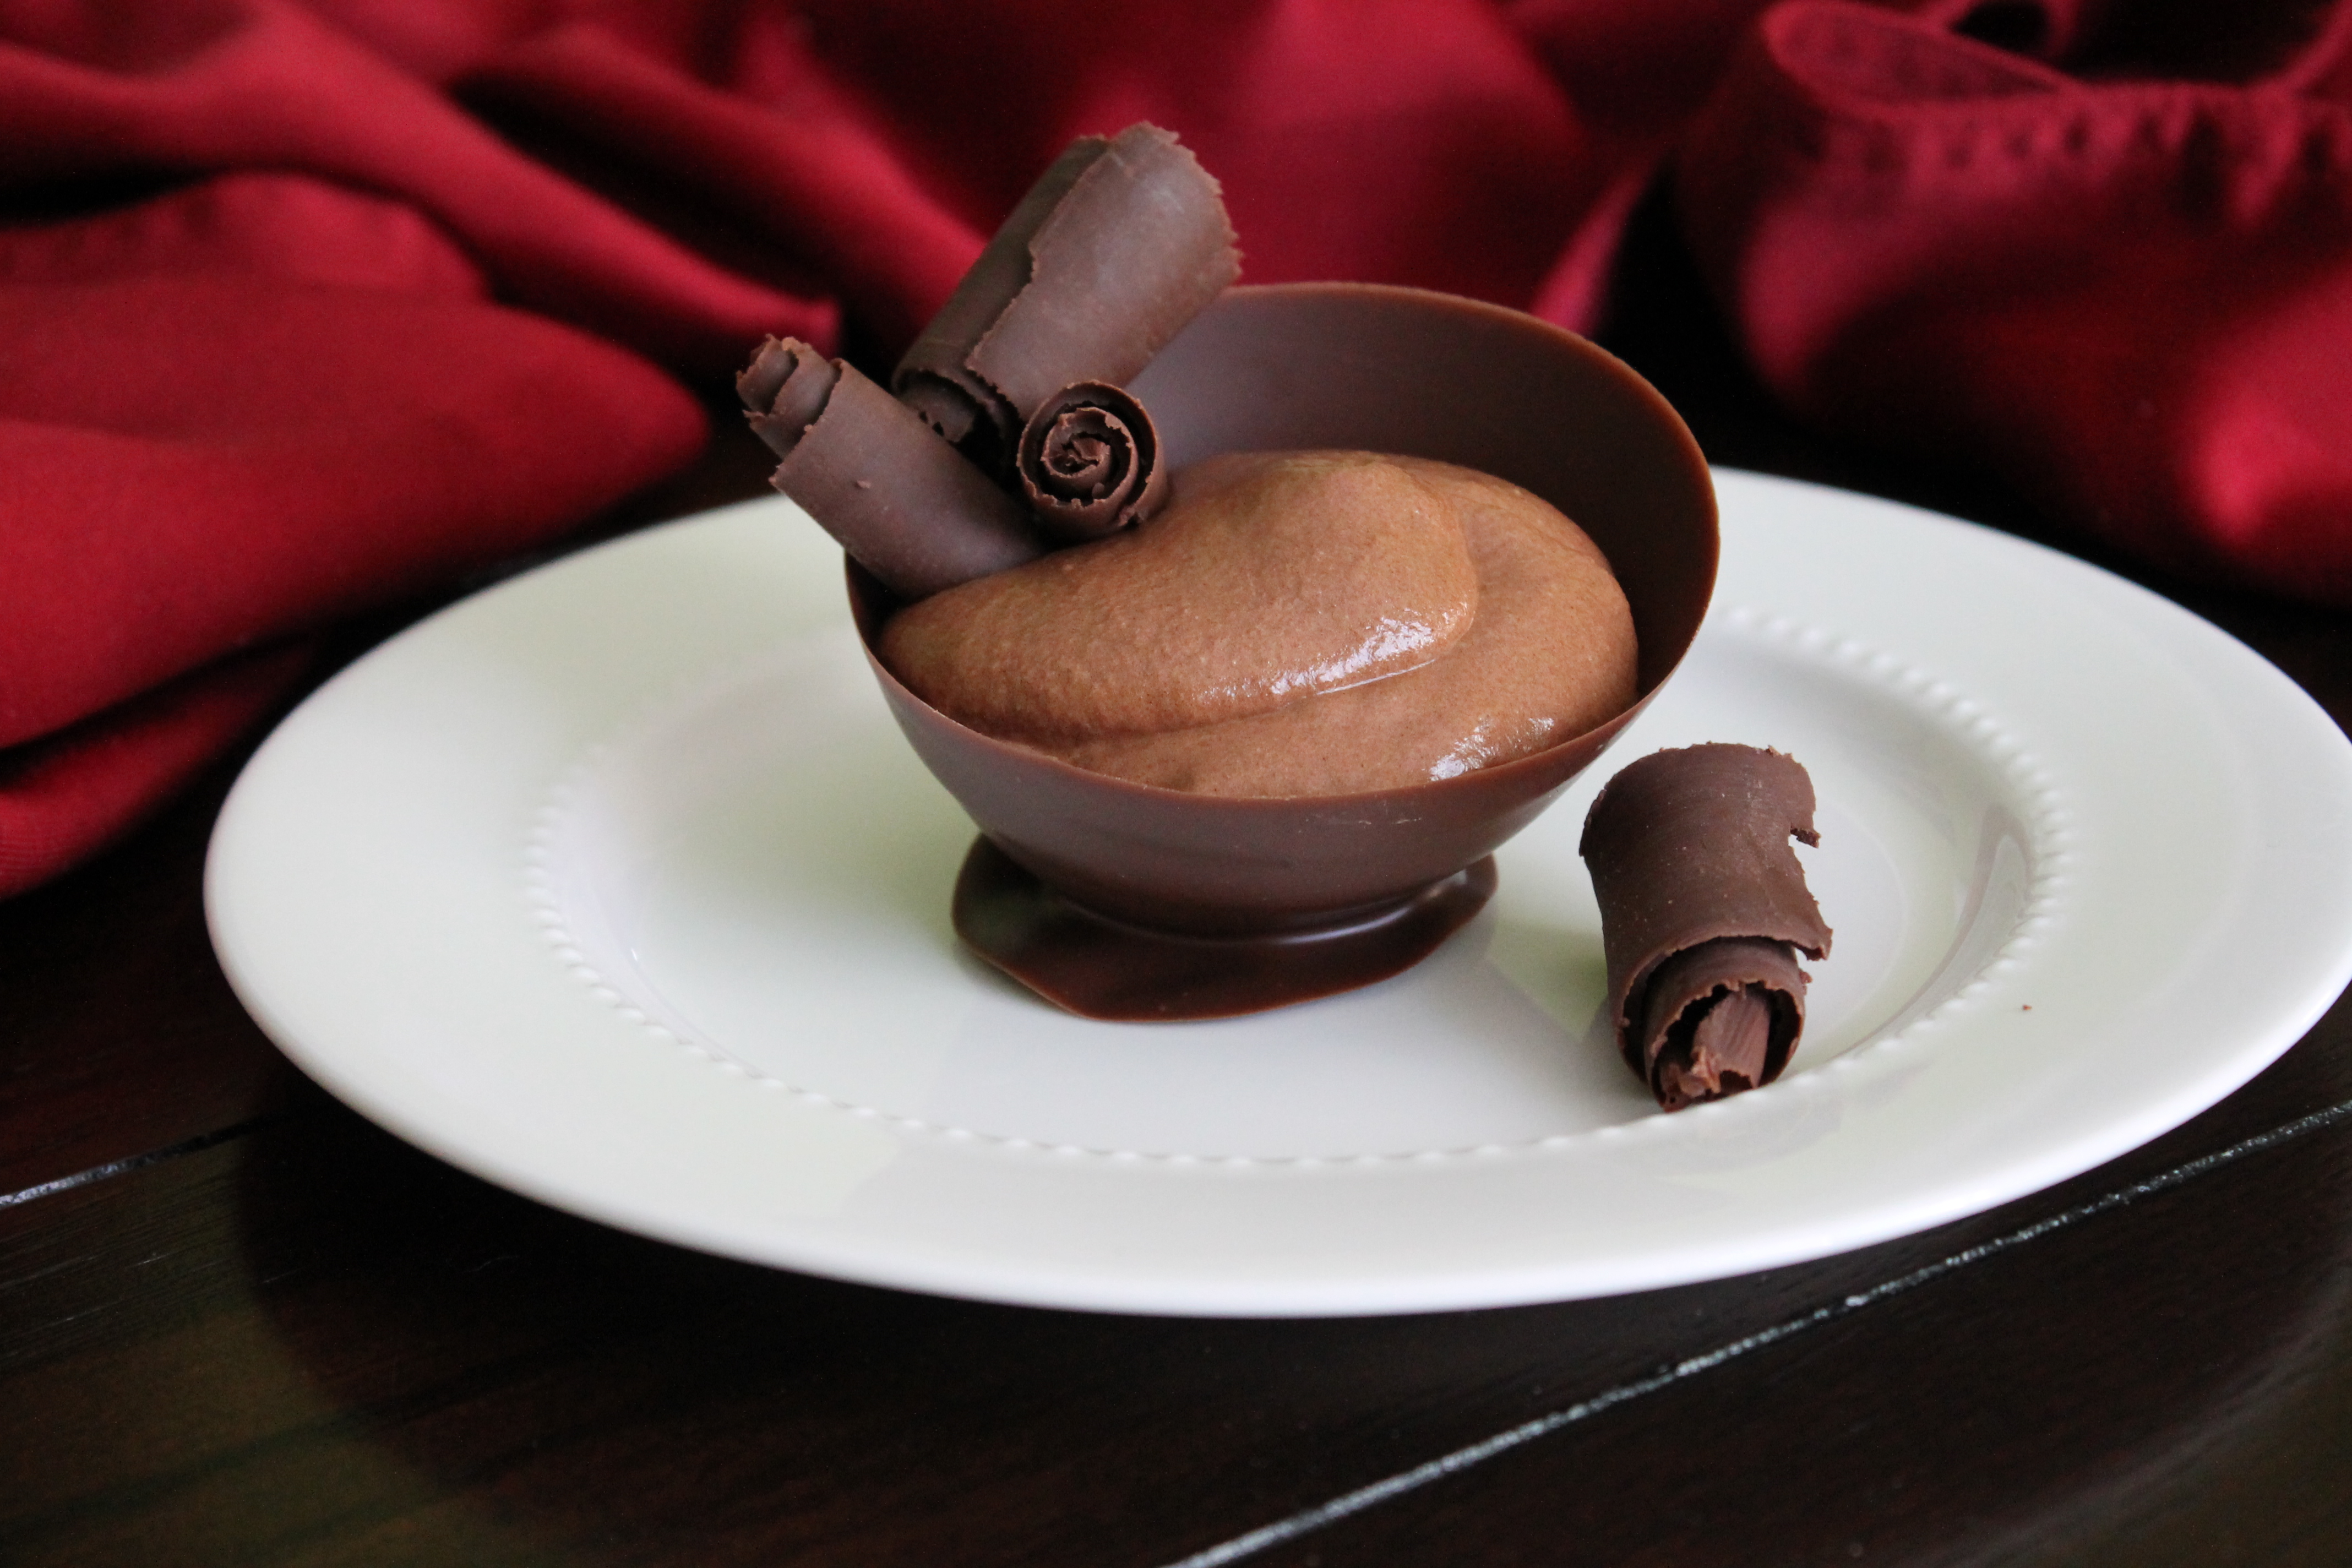 Chocolate Curls and Bowl, on Display